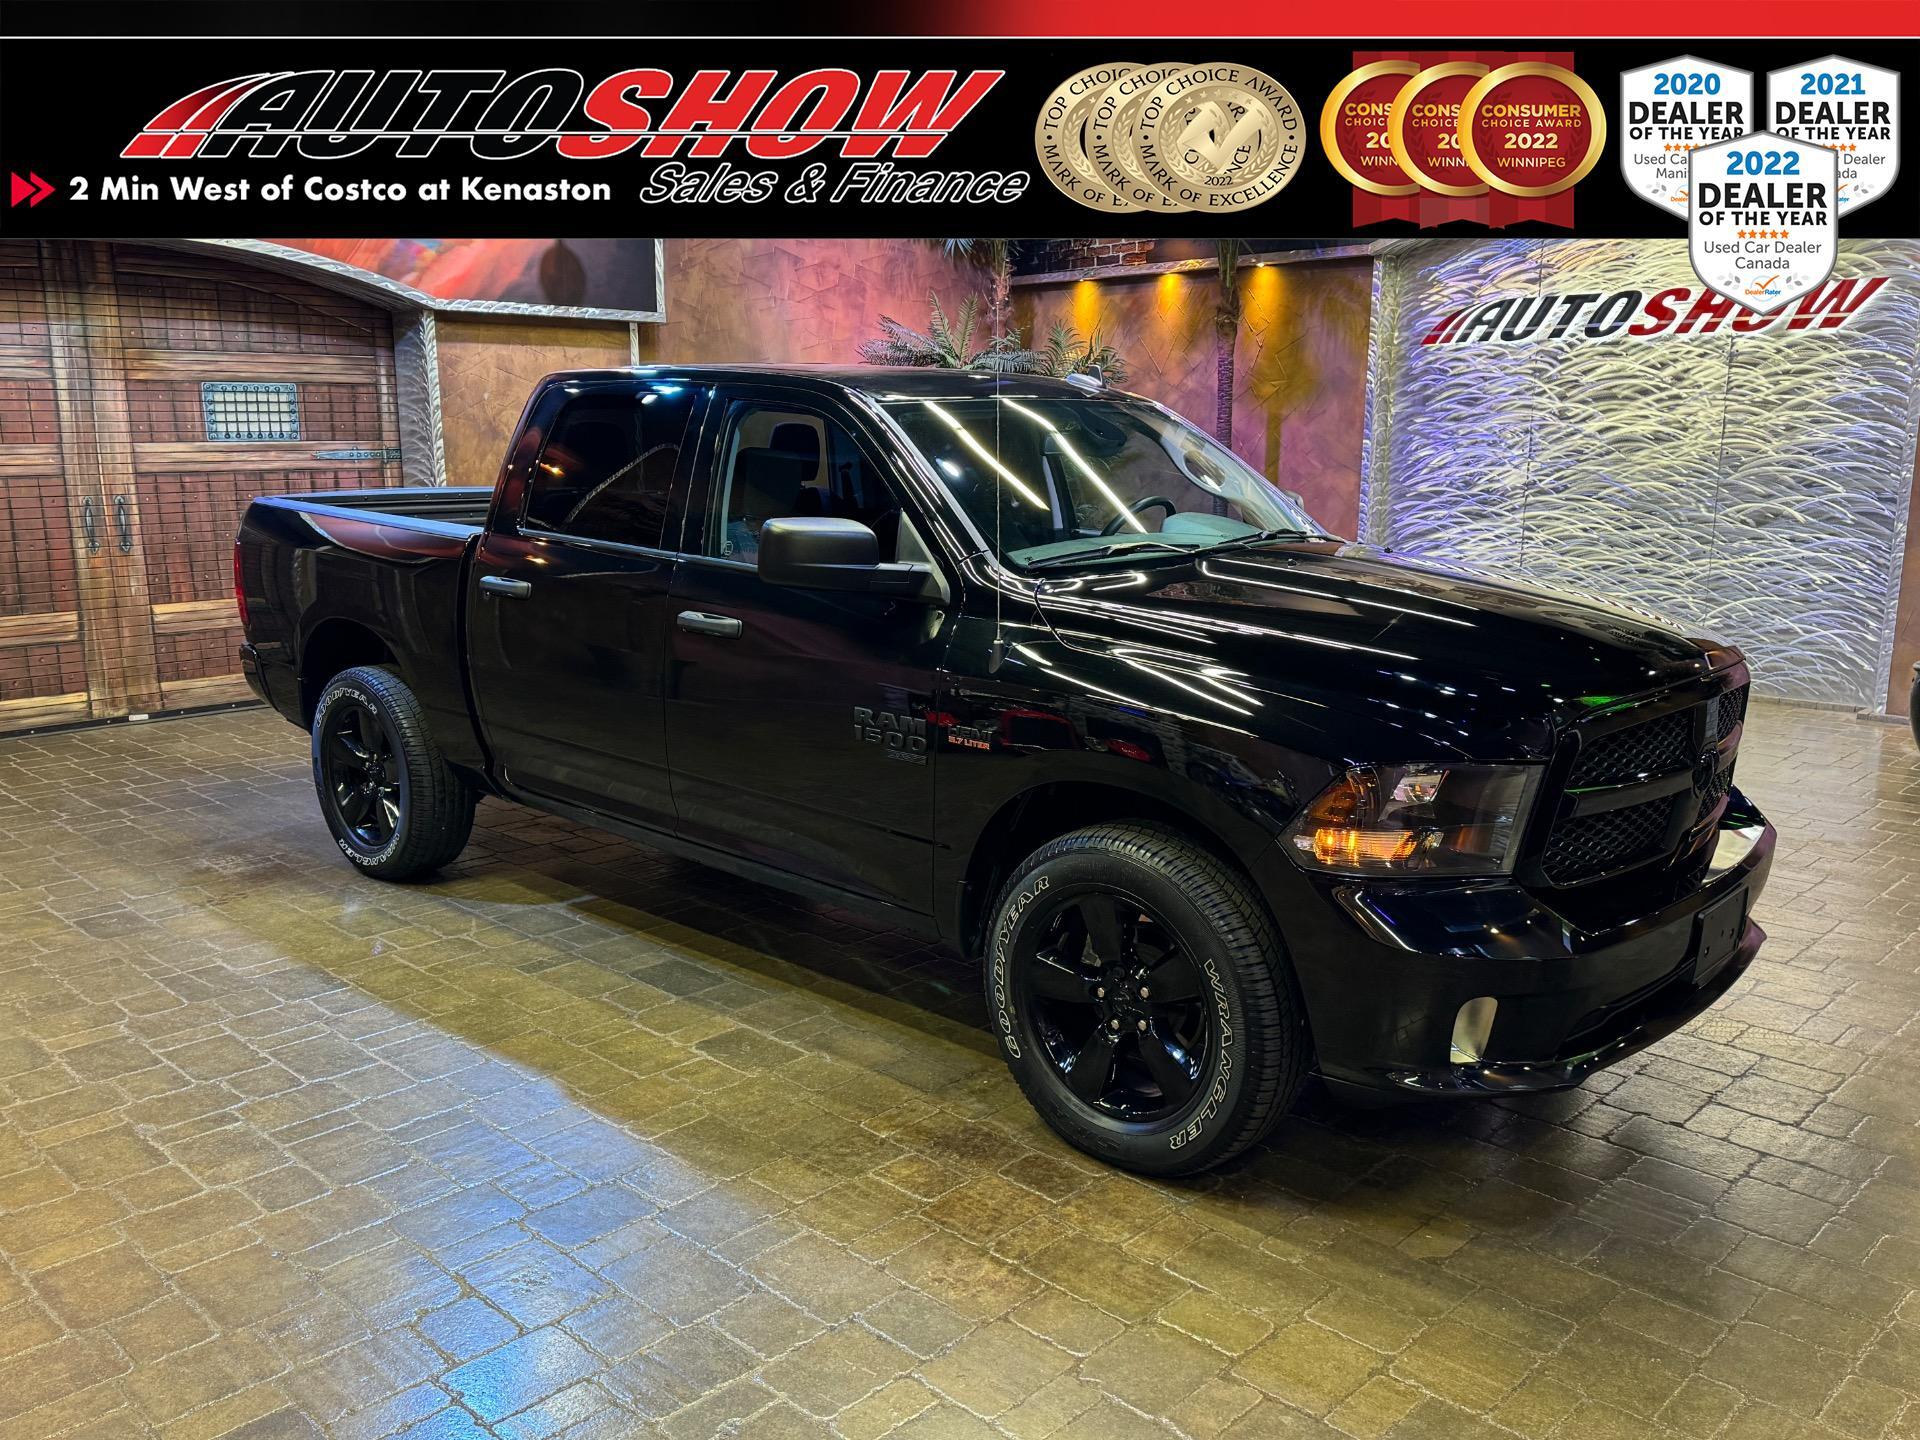 2023 Dodge Ram 1500 Classic Night Edition - Htd Seats & Whl, Bedliner, 8.4in S